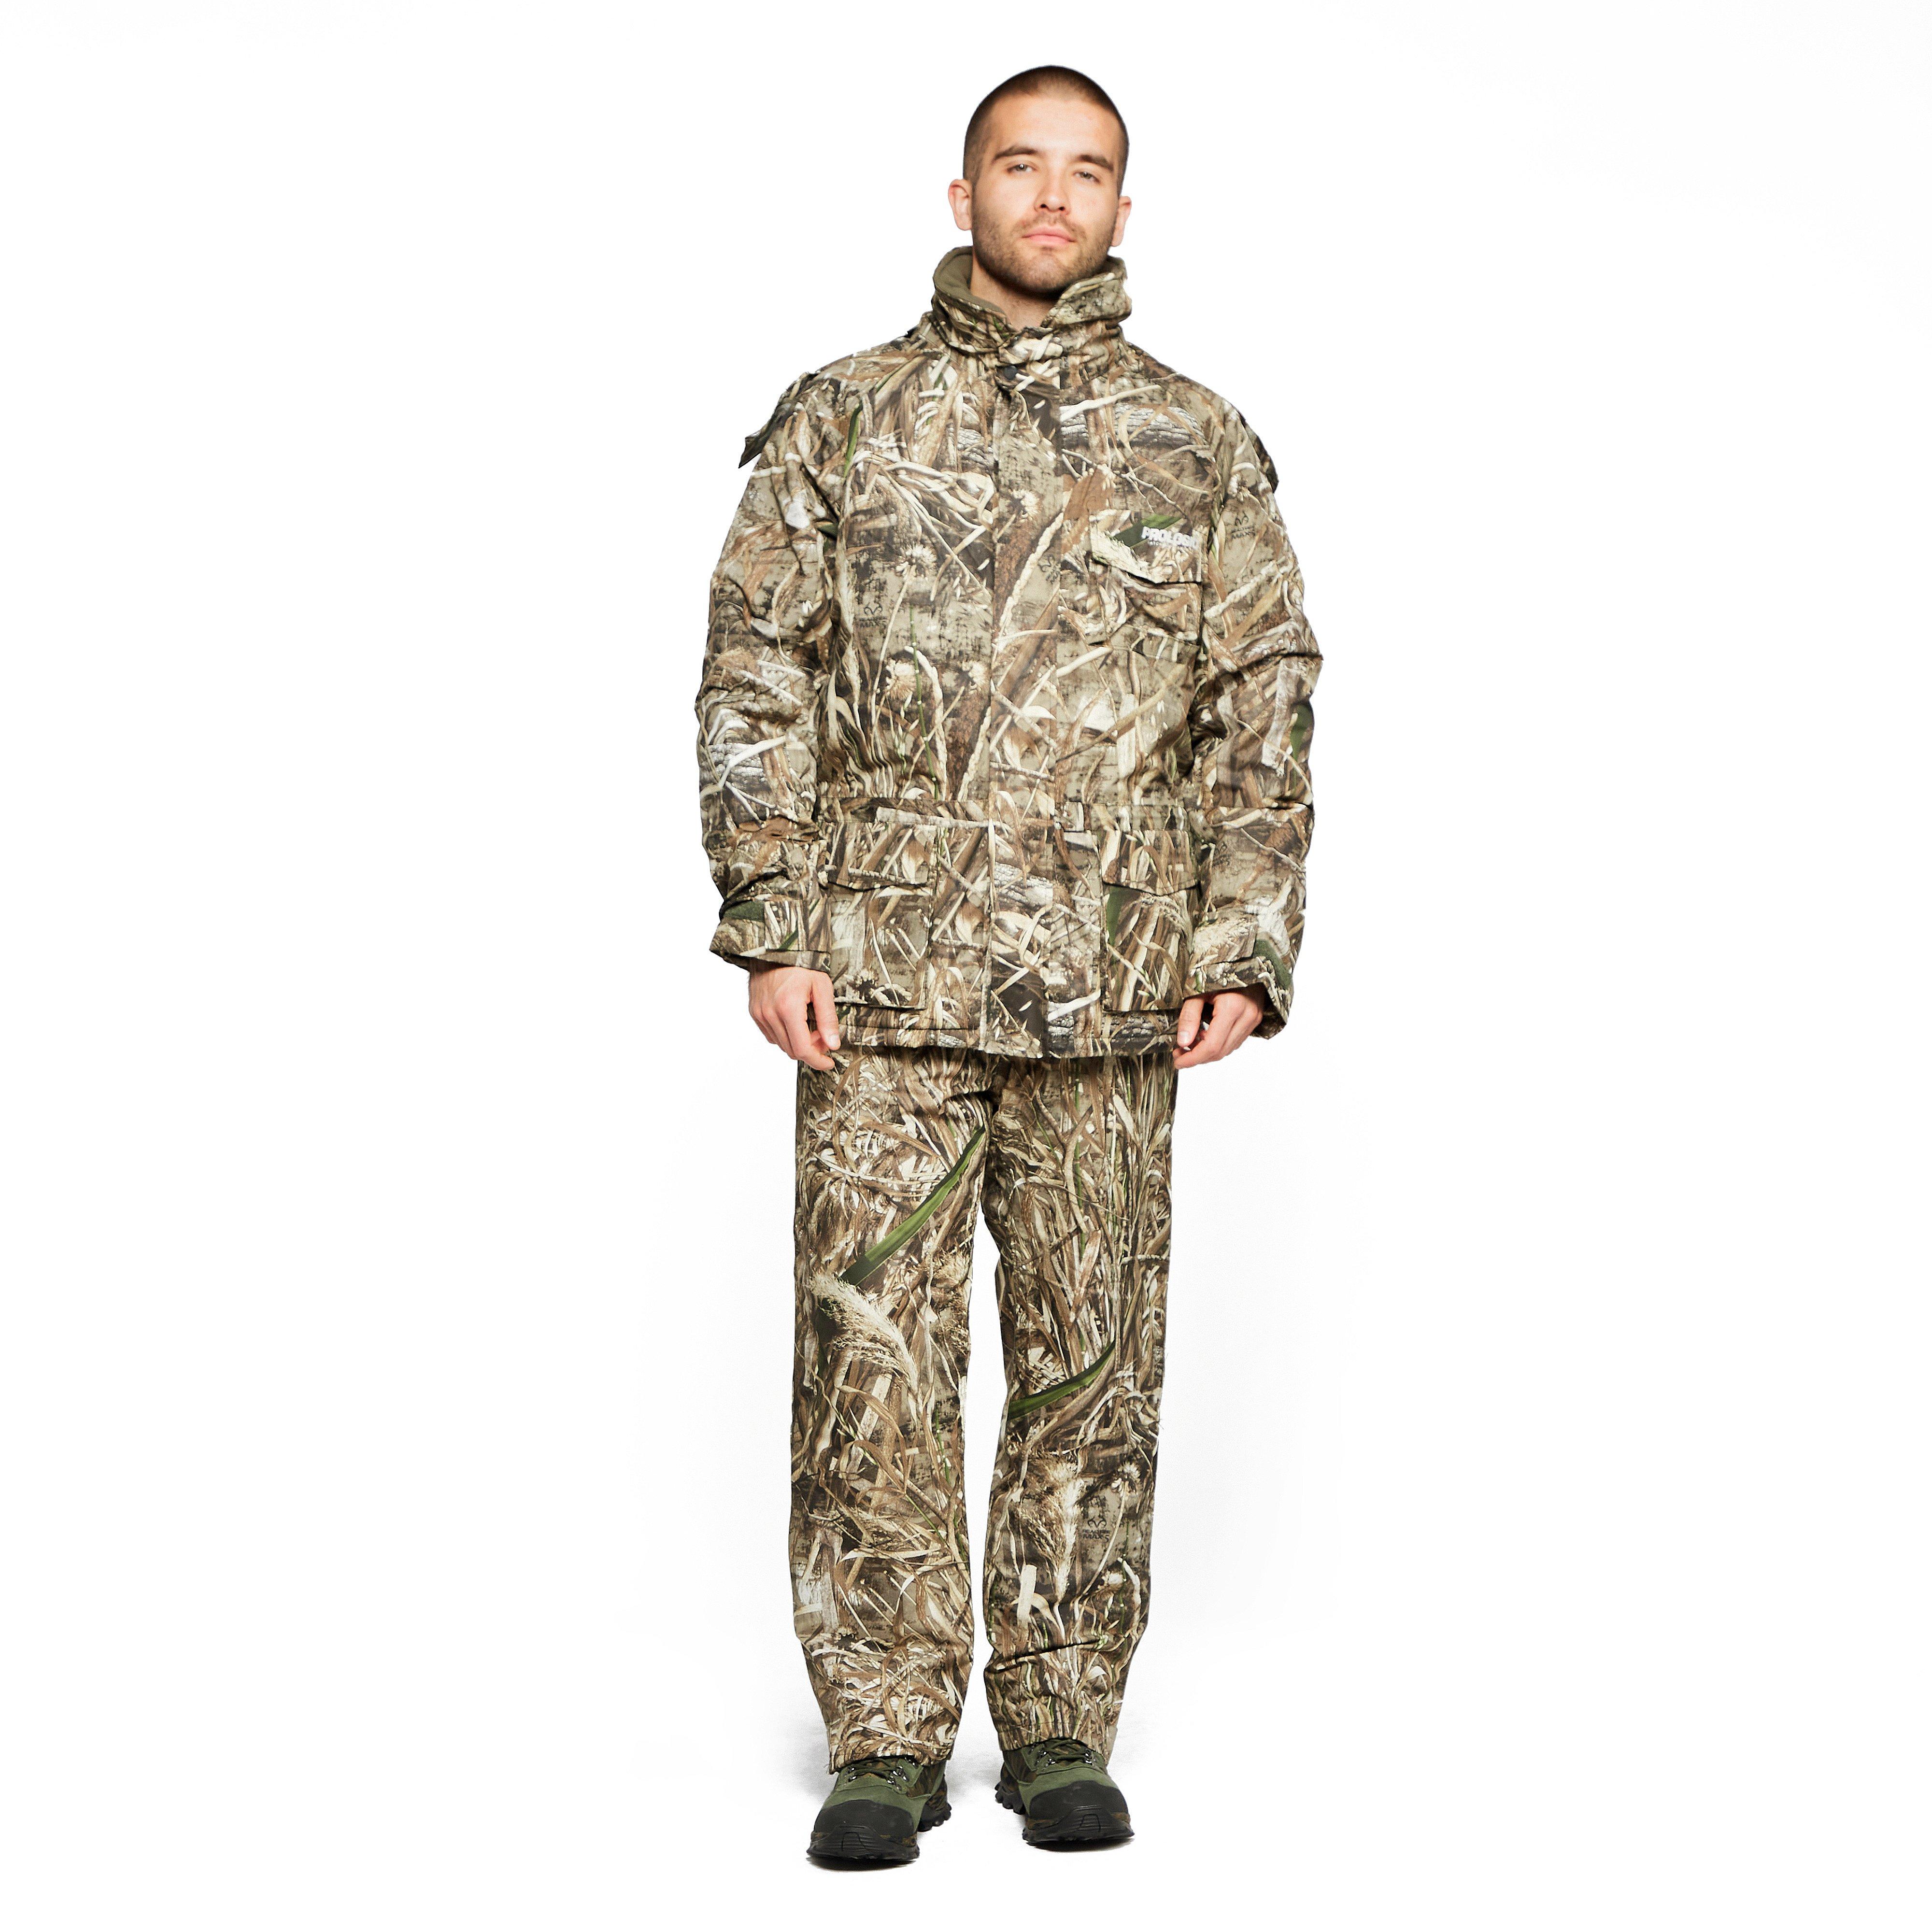 Prologic Comfort Thermo Suit (MAX5 Camo, 2 PCS) Review